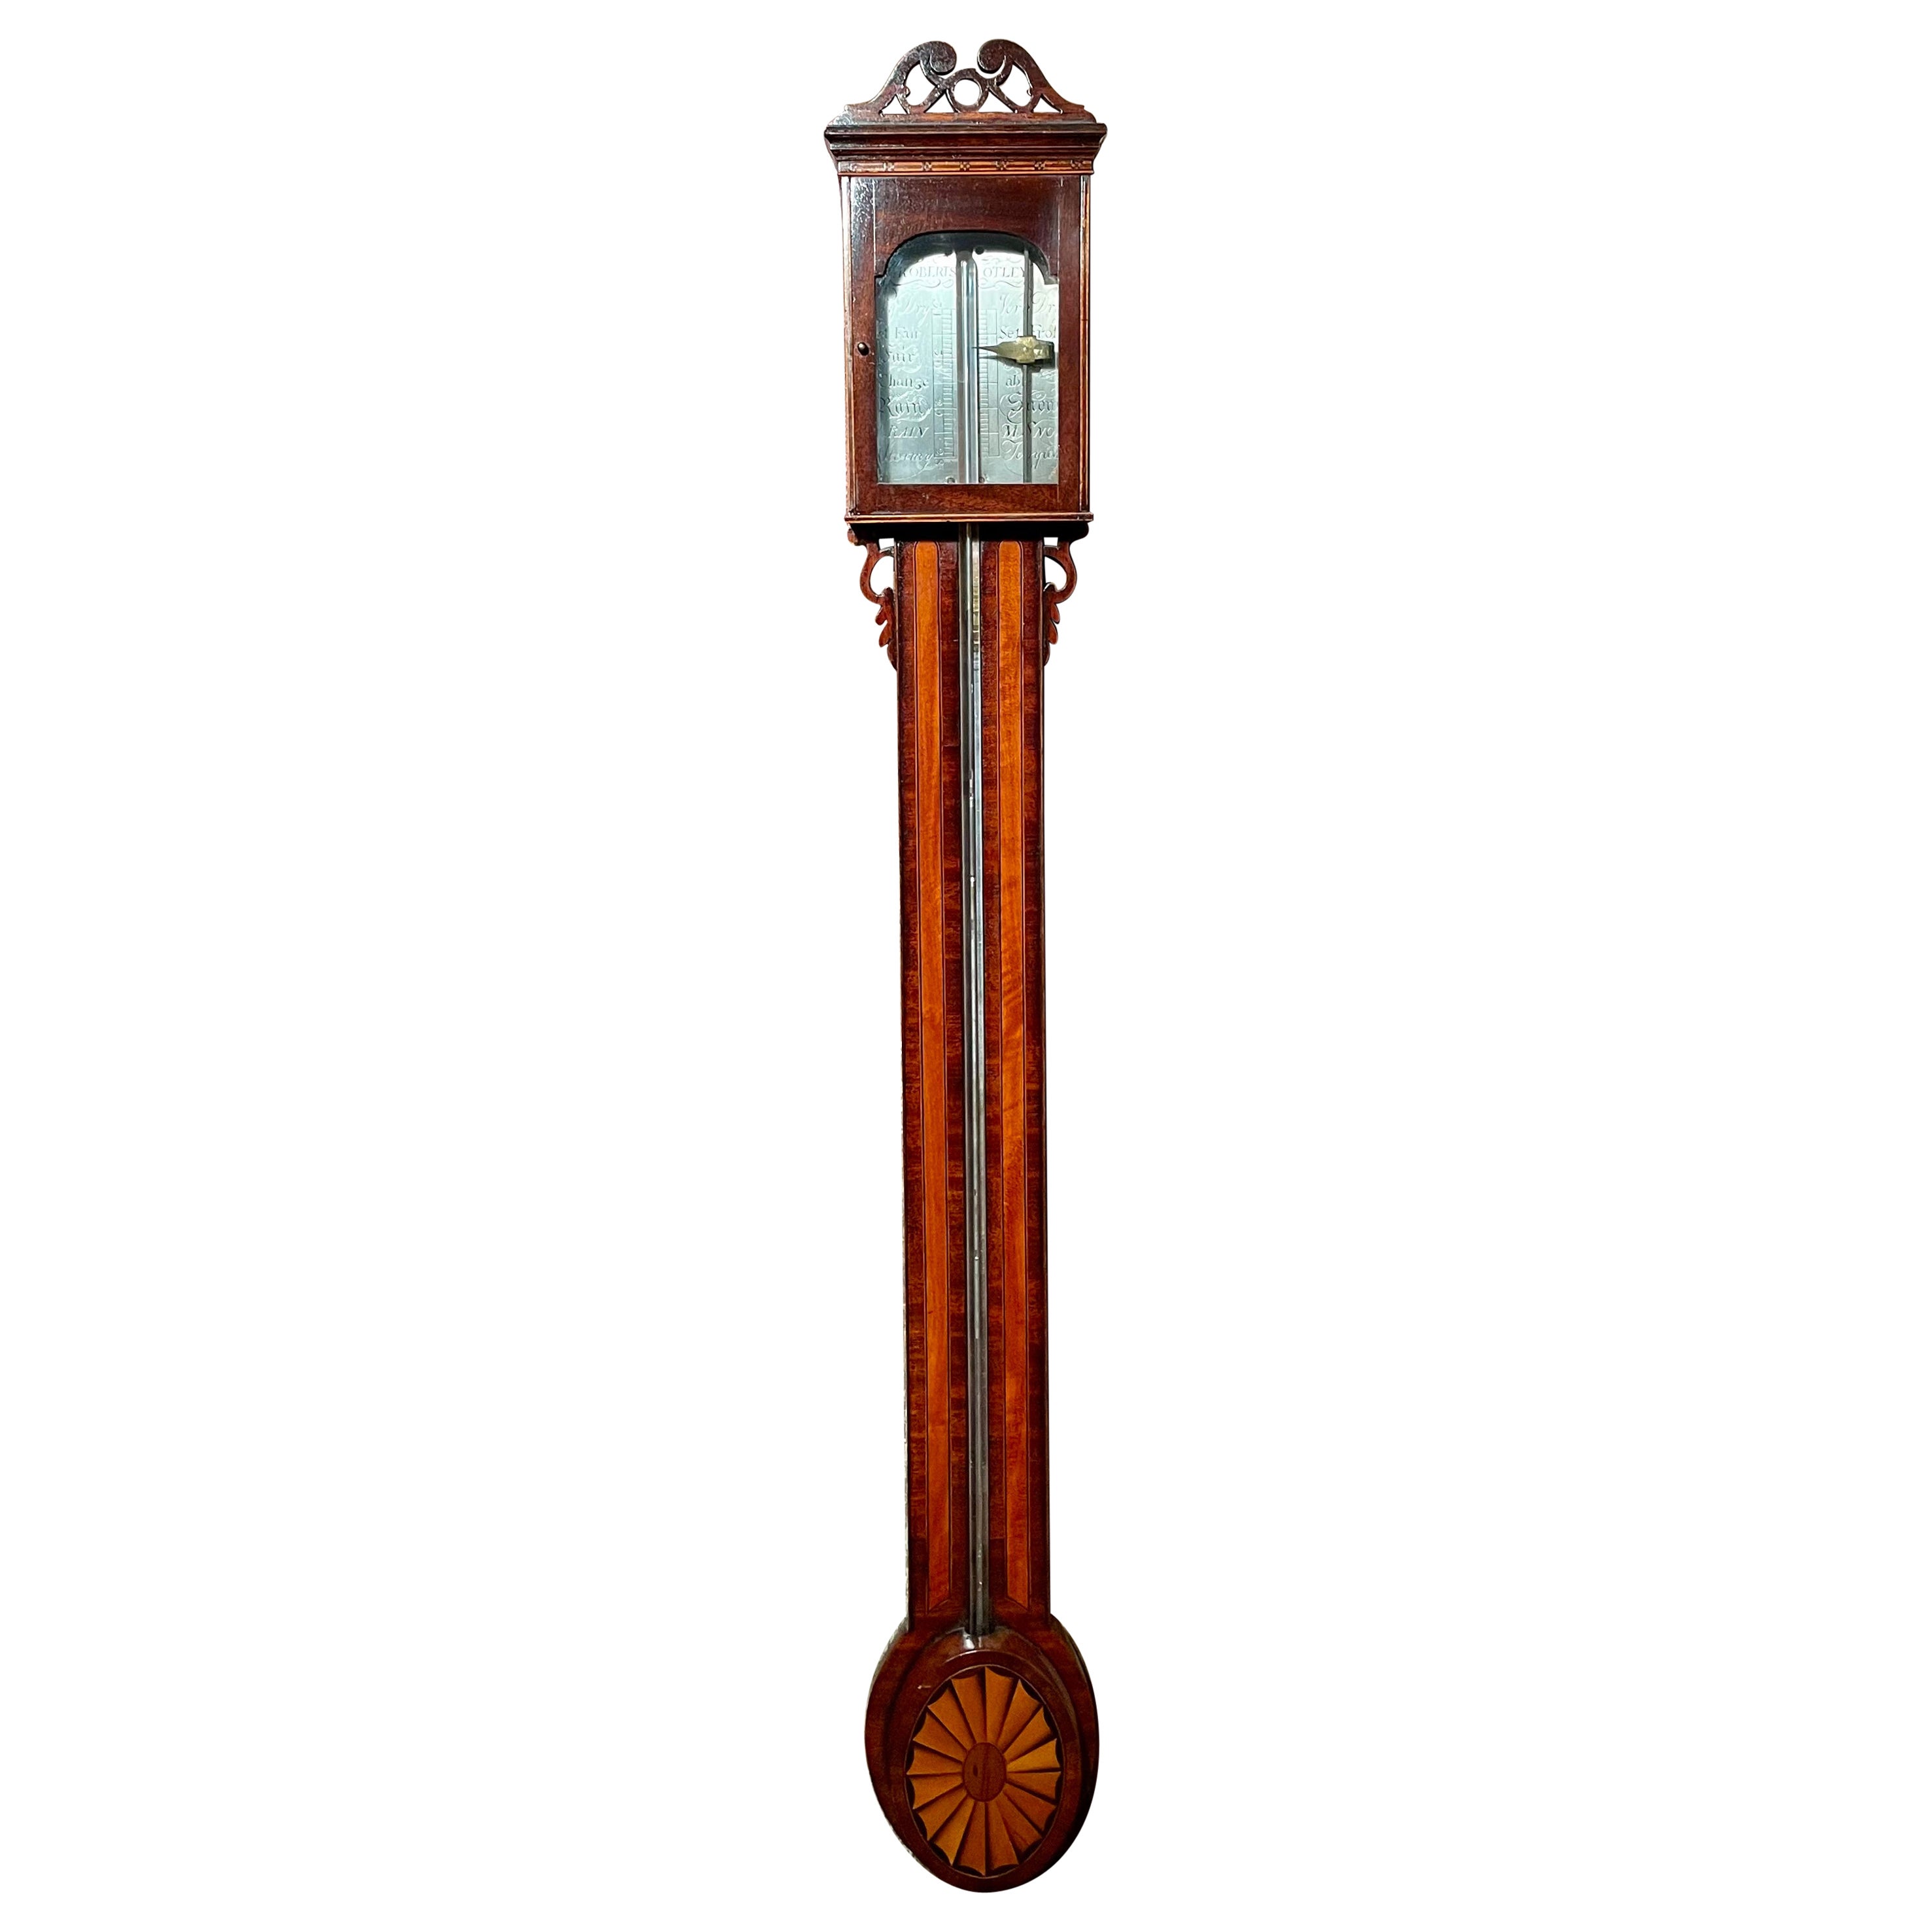 Antique Regency Mahogany Stick Barometer with Silvered Scale by "T. Cook, York"